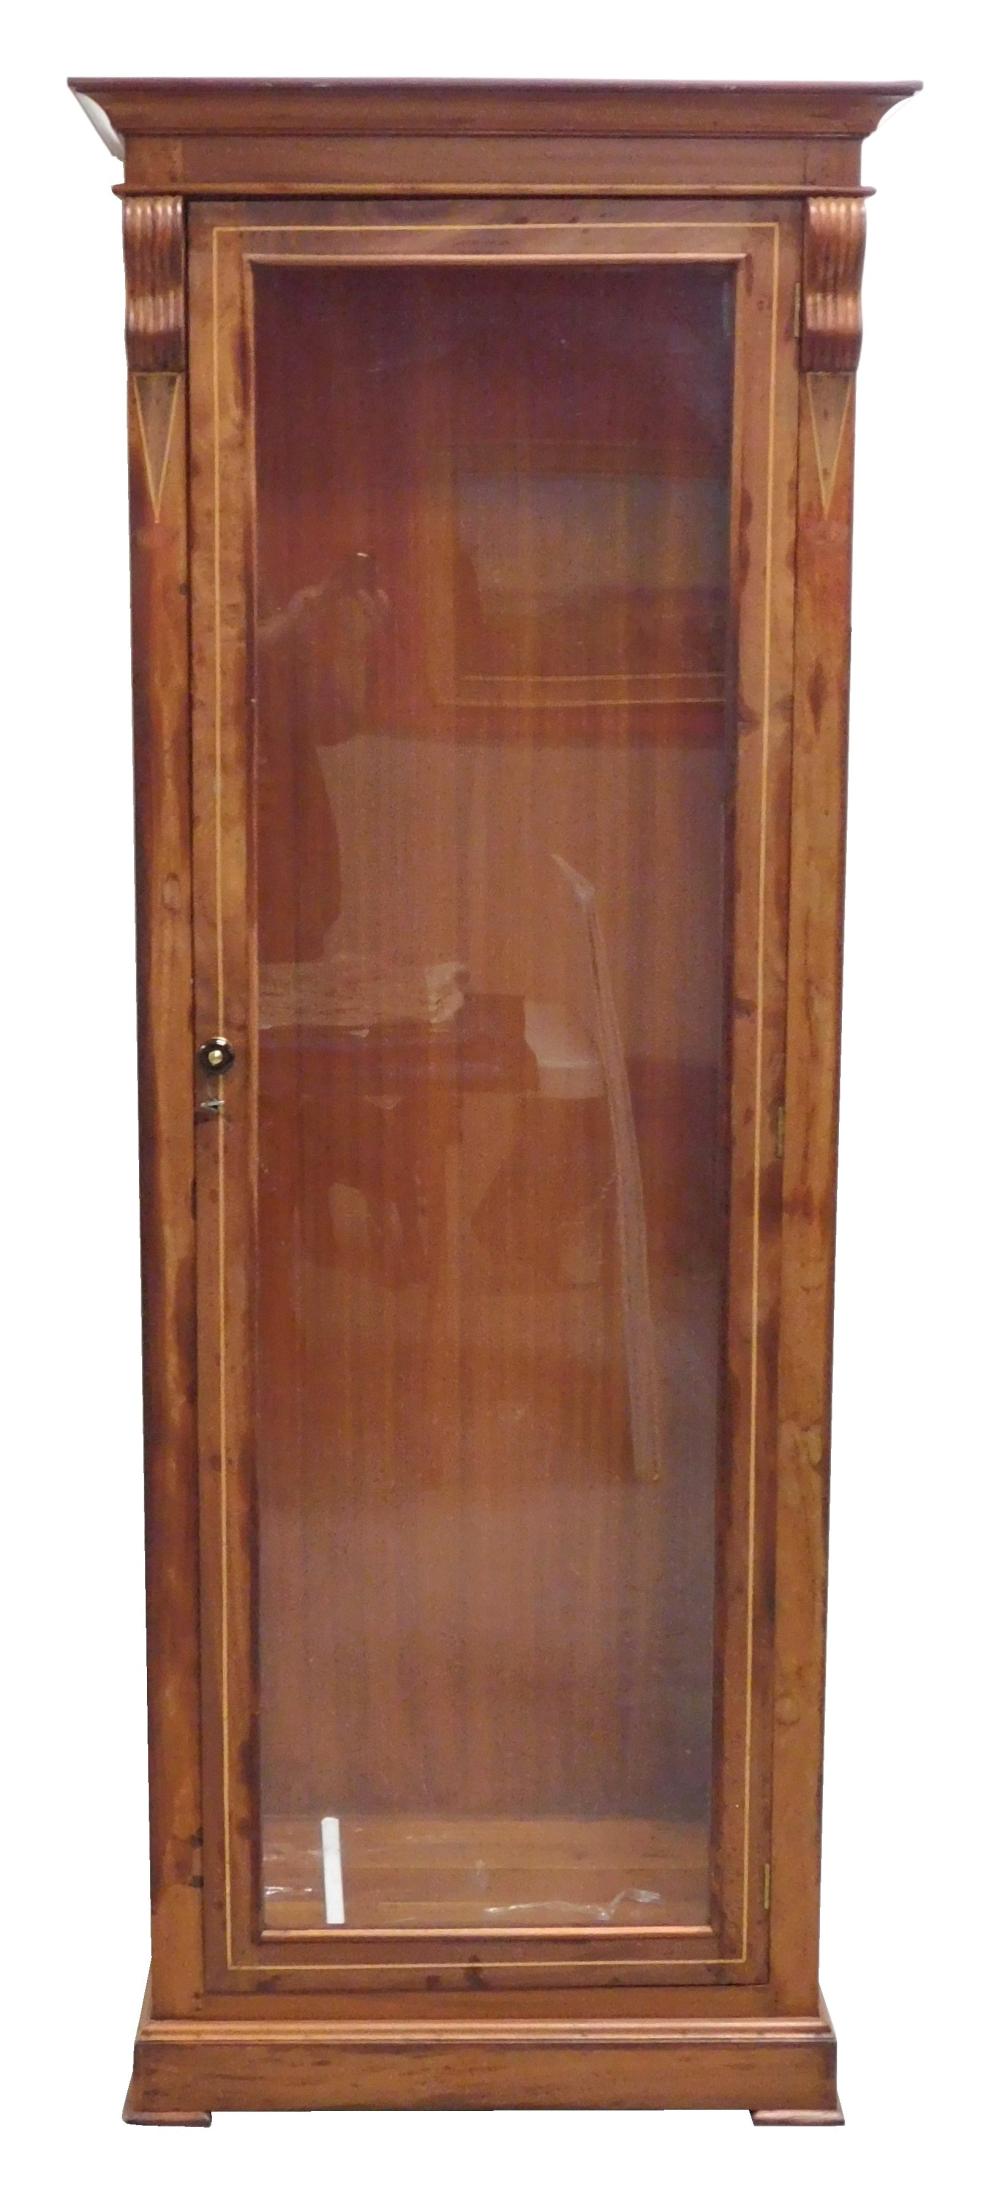 TALL FEDERAL STYLE DISPLAY CABINET 2e26bf